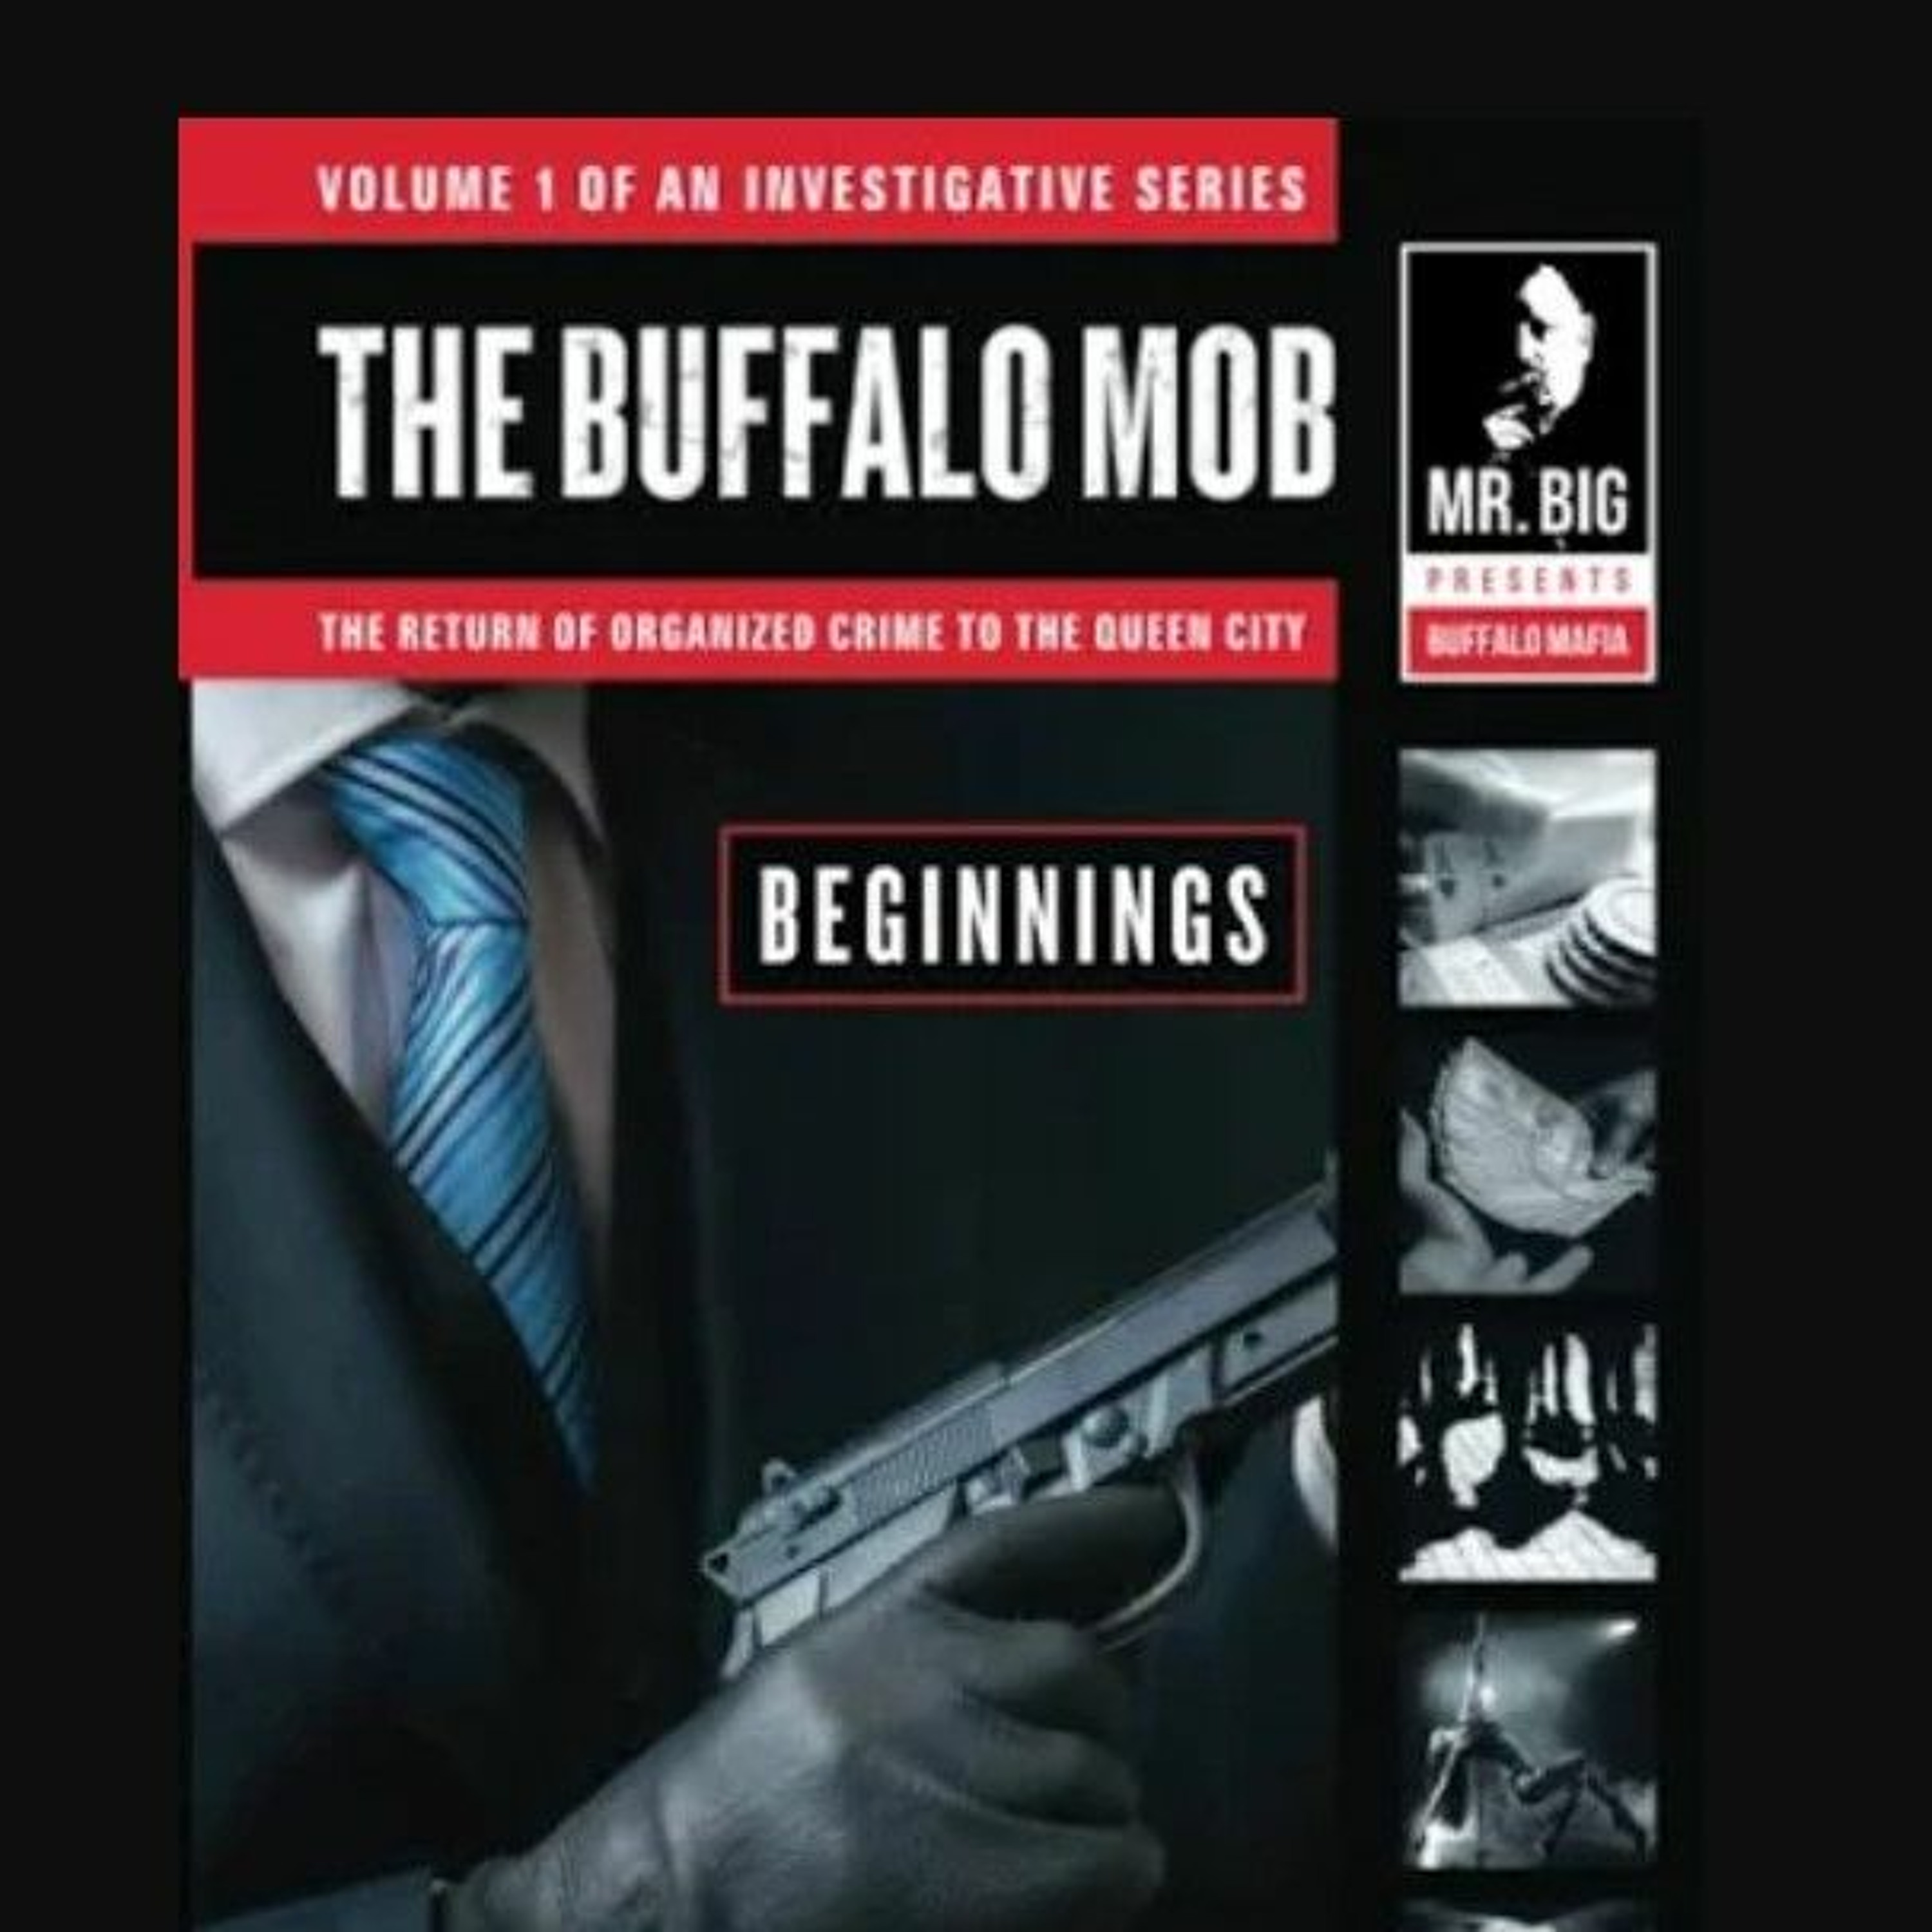 ”The Buffalo Mob” - The Complete Wayne Clingman Interview